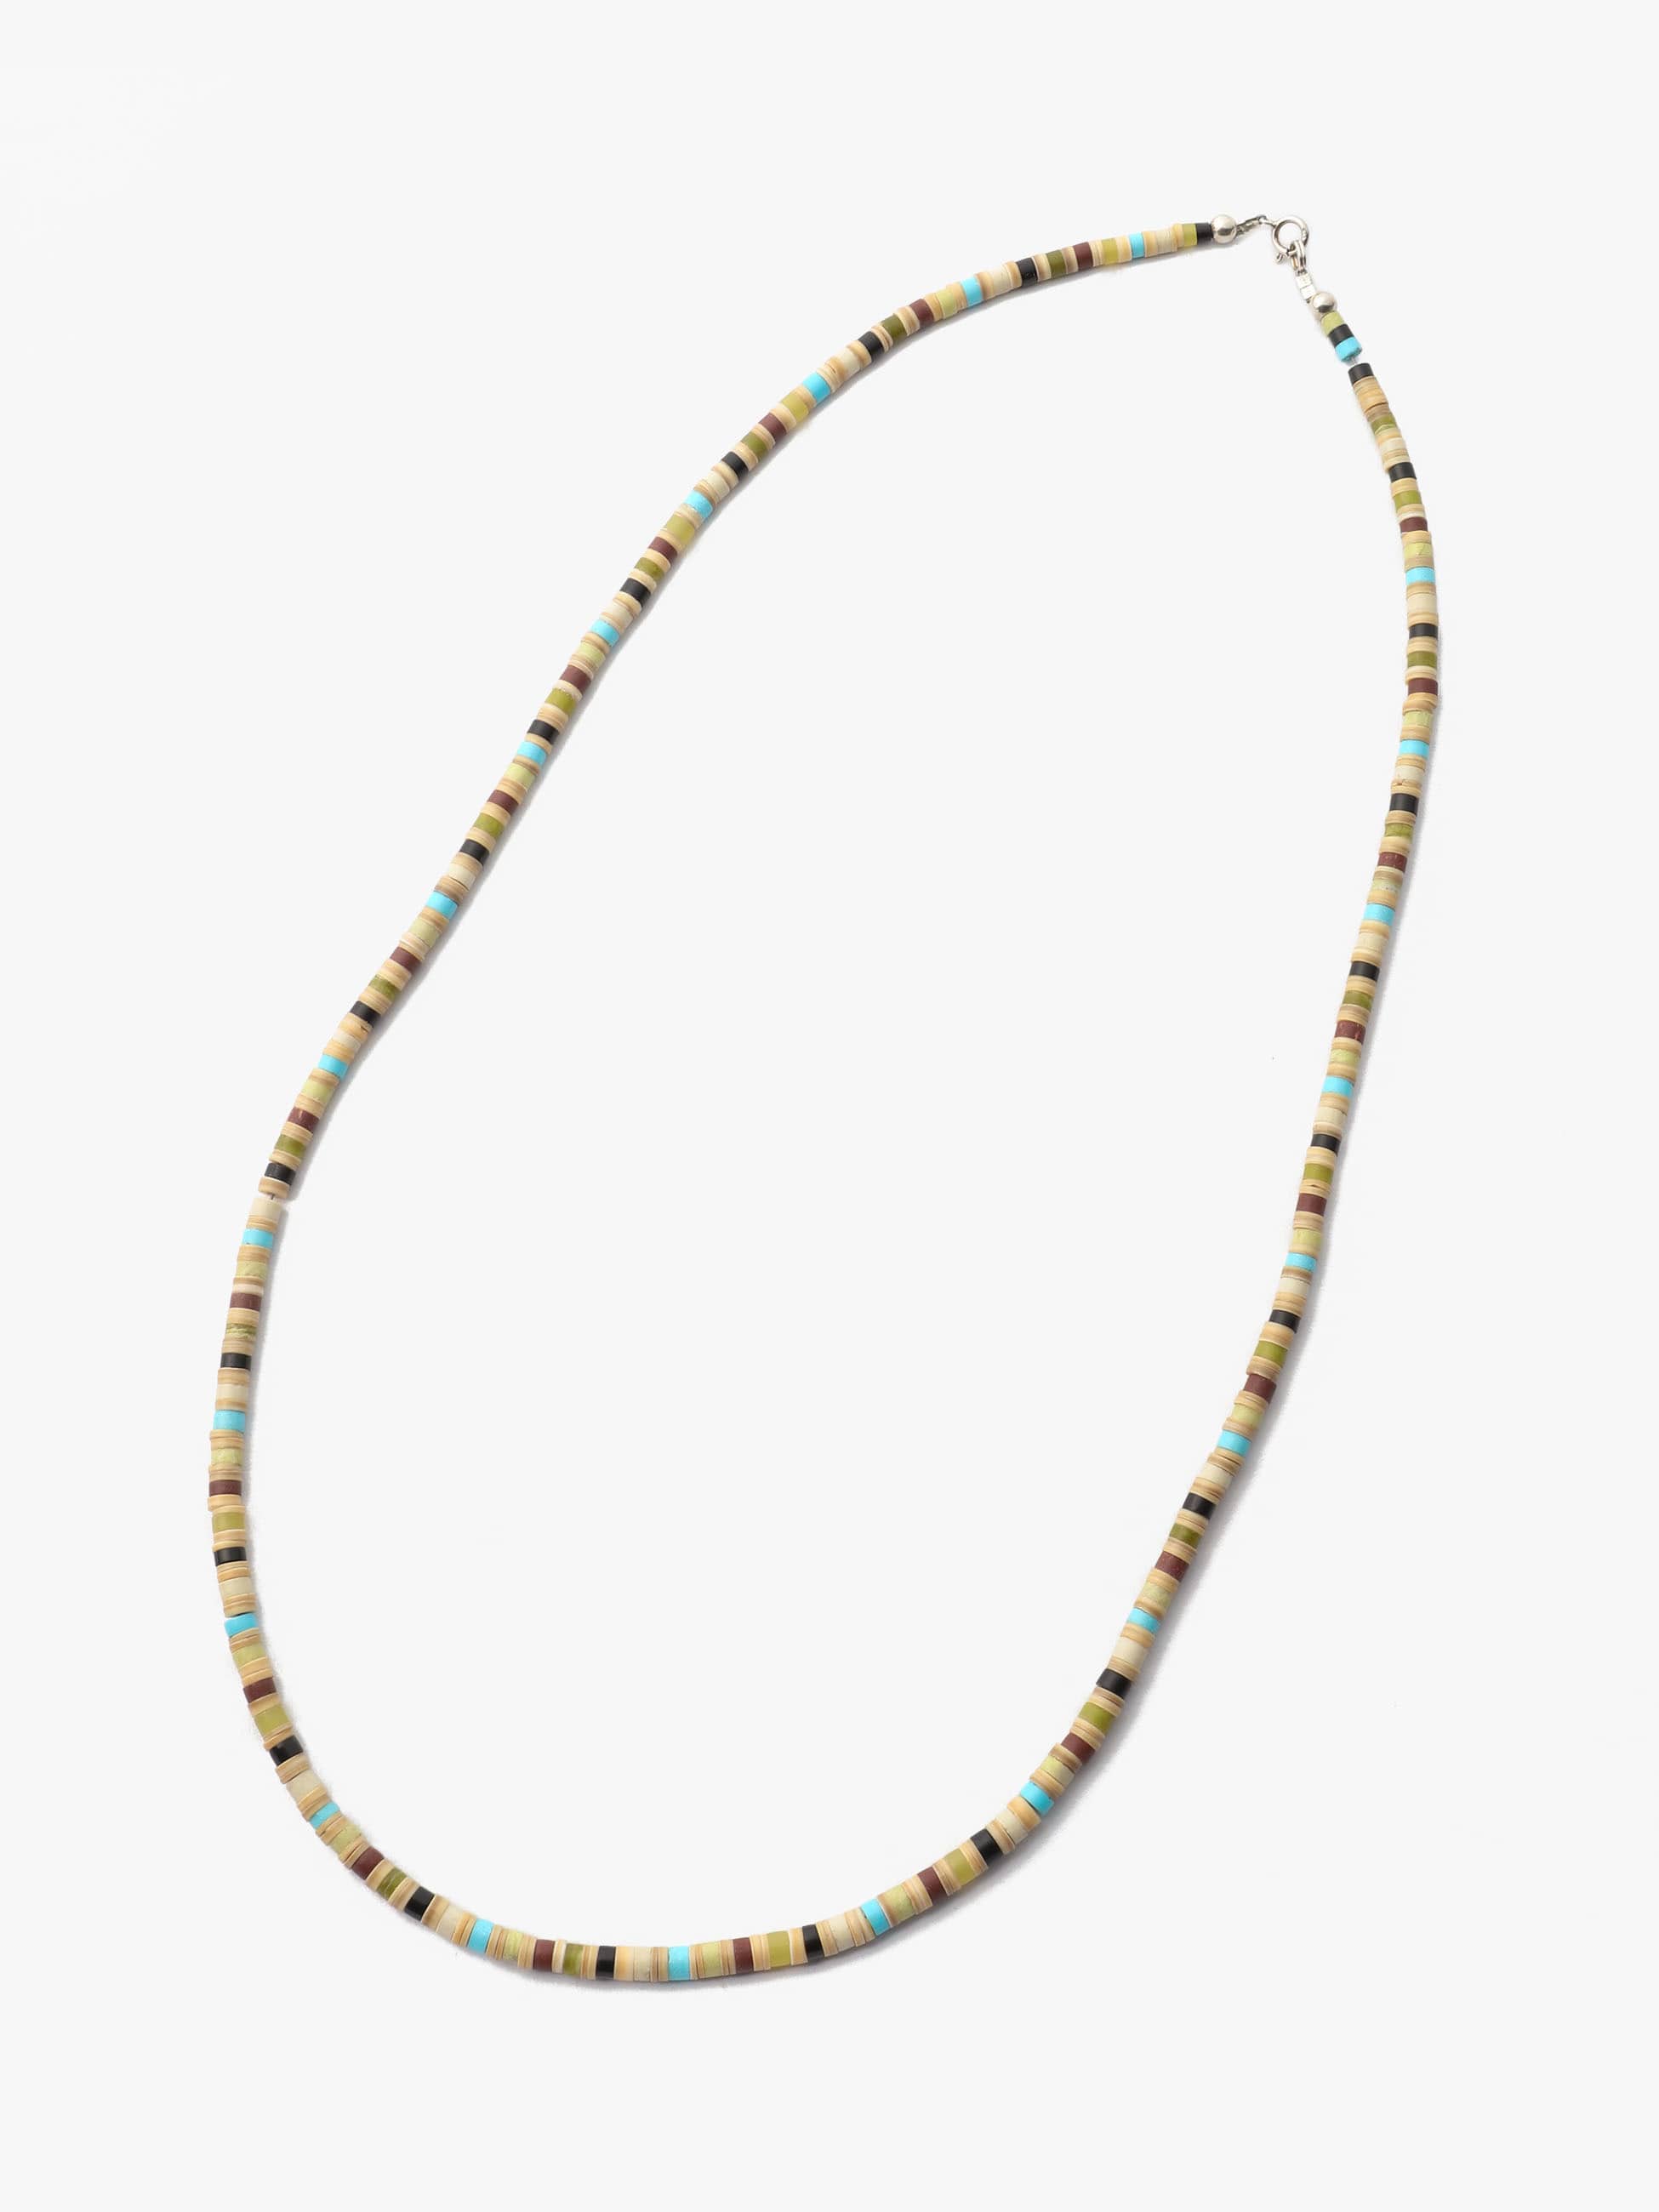 The Best Colorful Beaded Necklaces